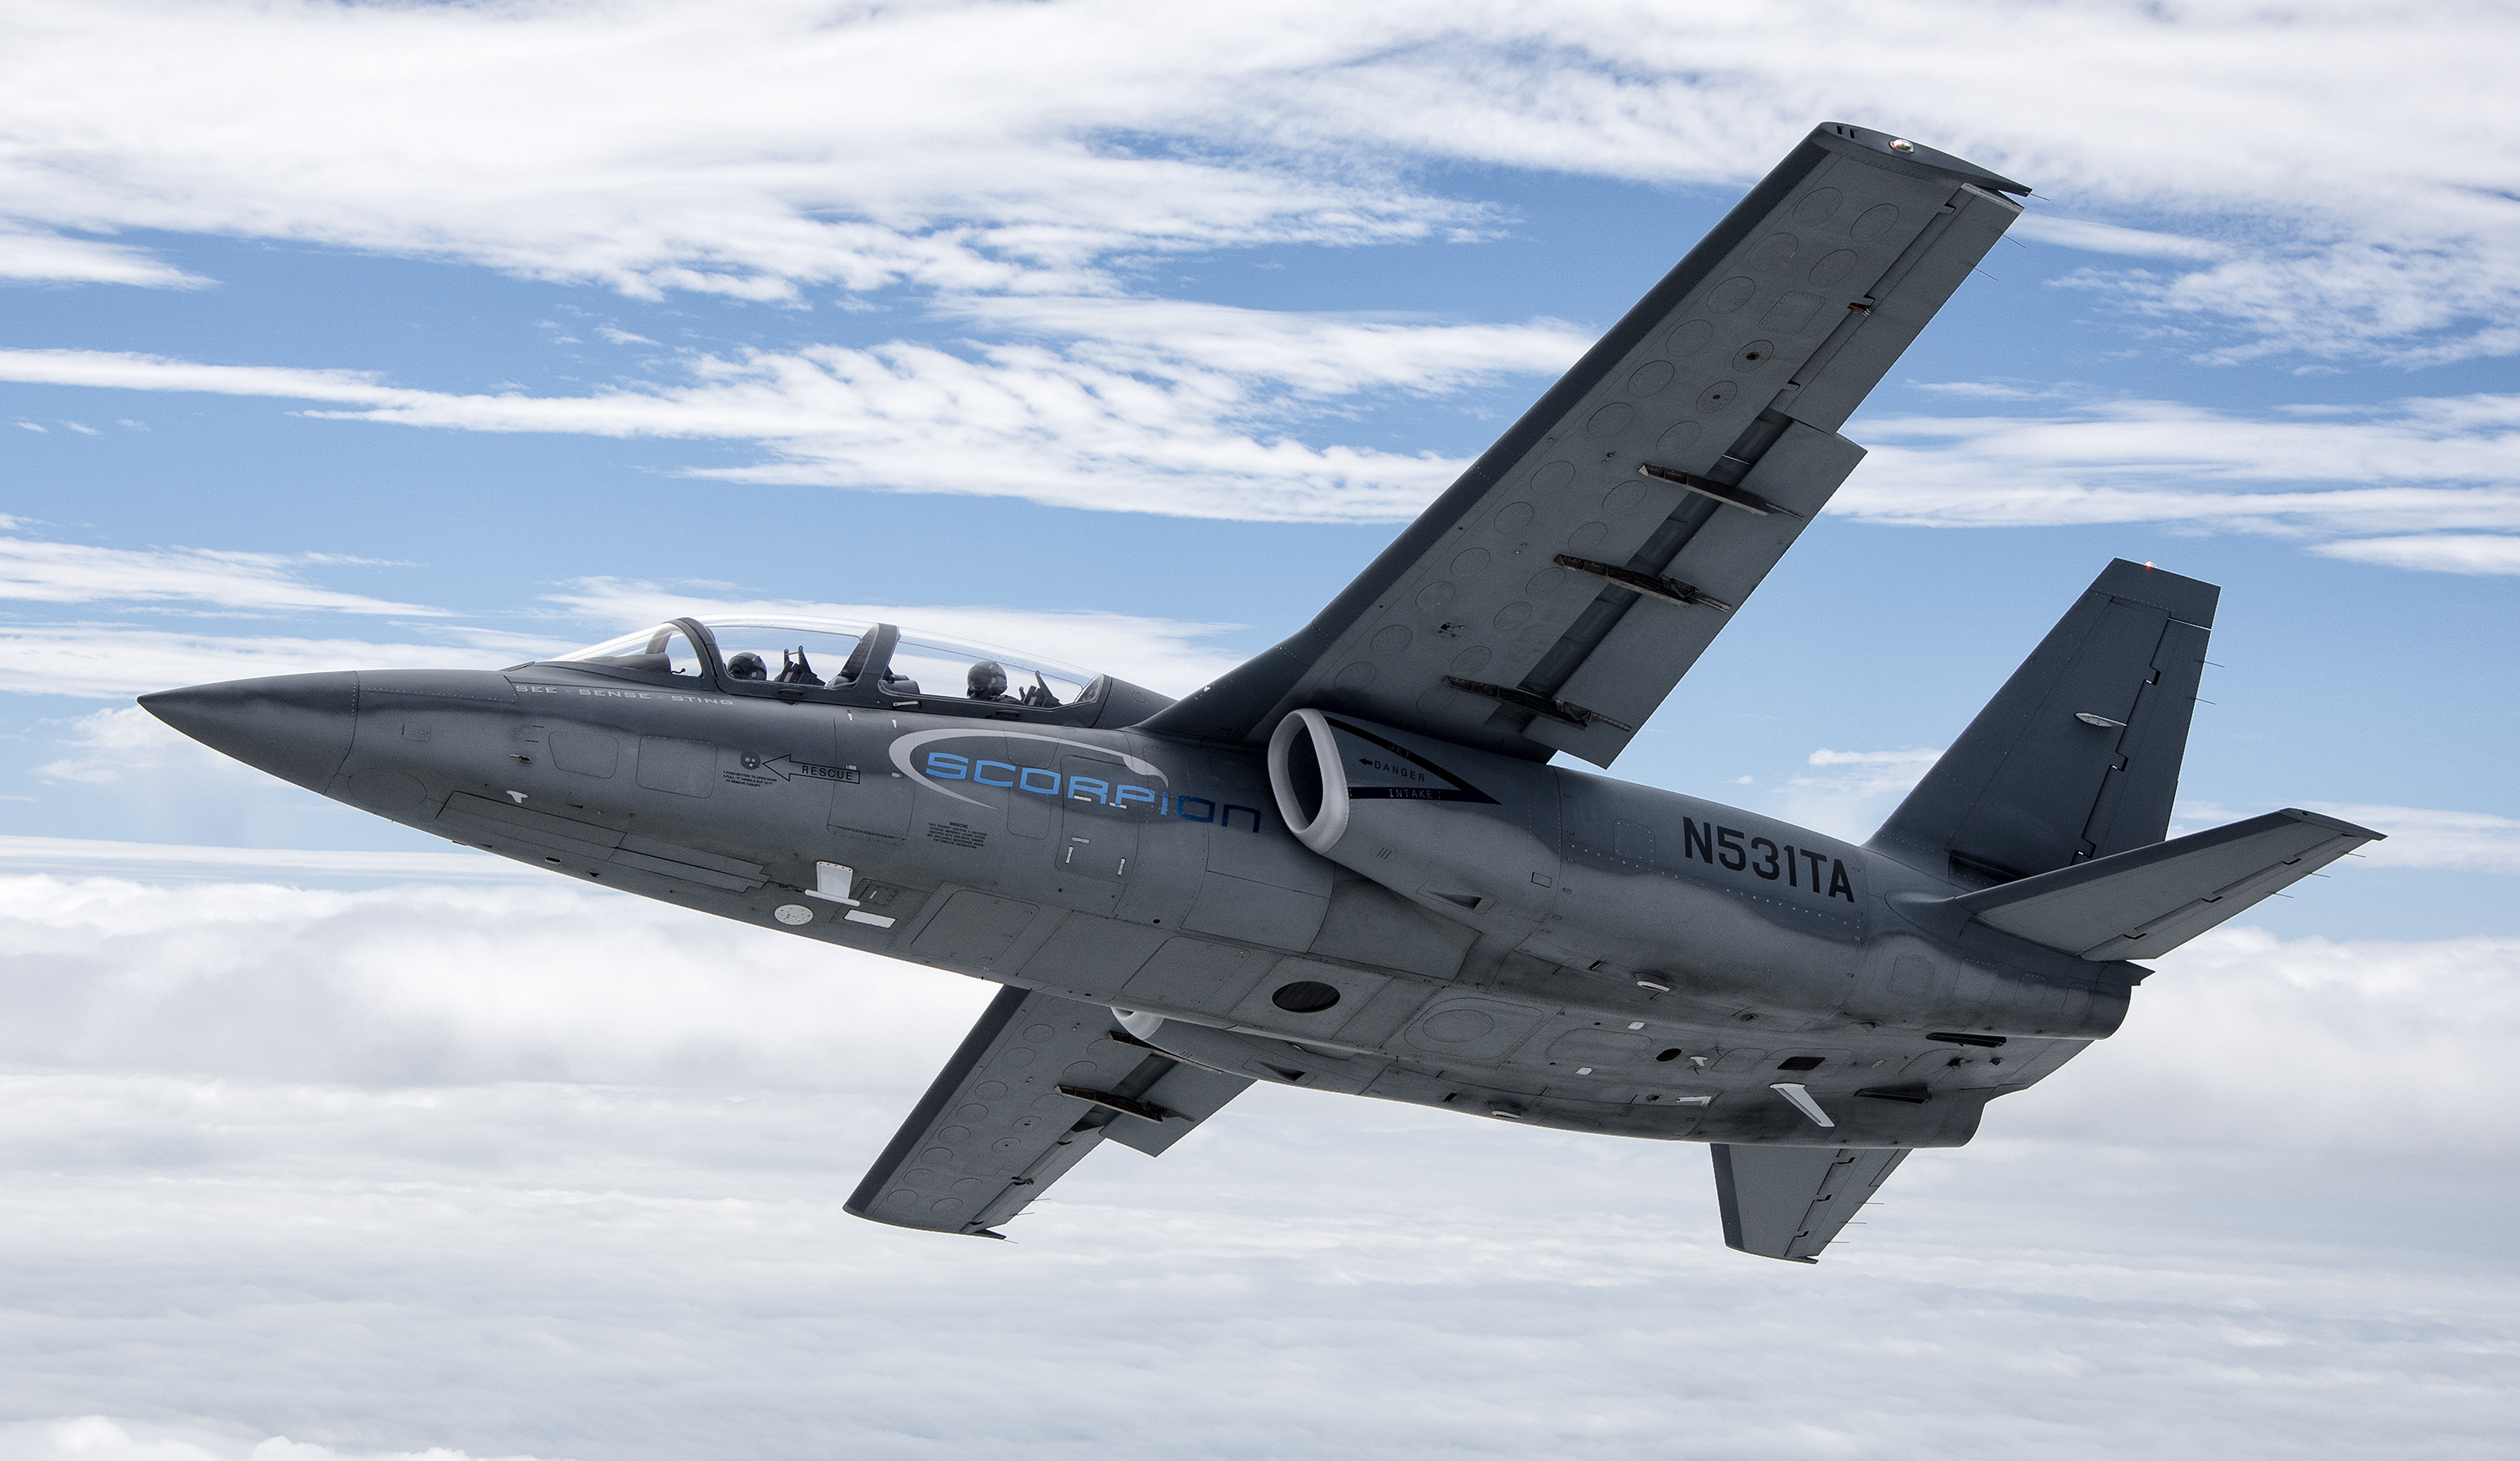 Two Fast-Growing Private Jet Operators Place Orders With Textron